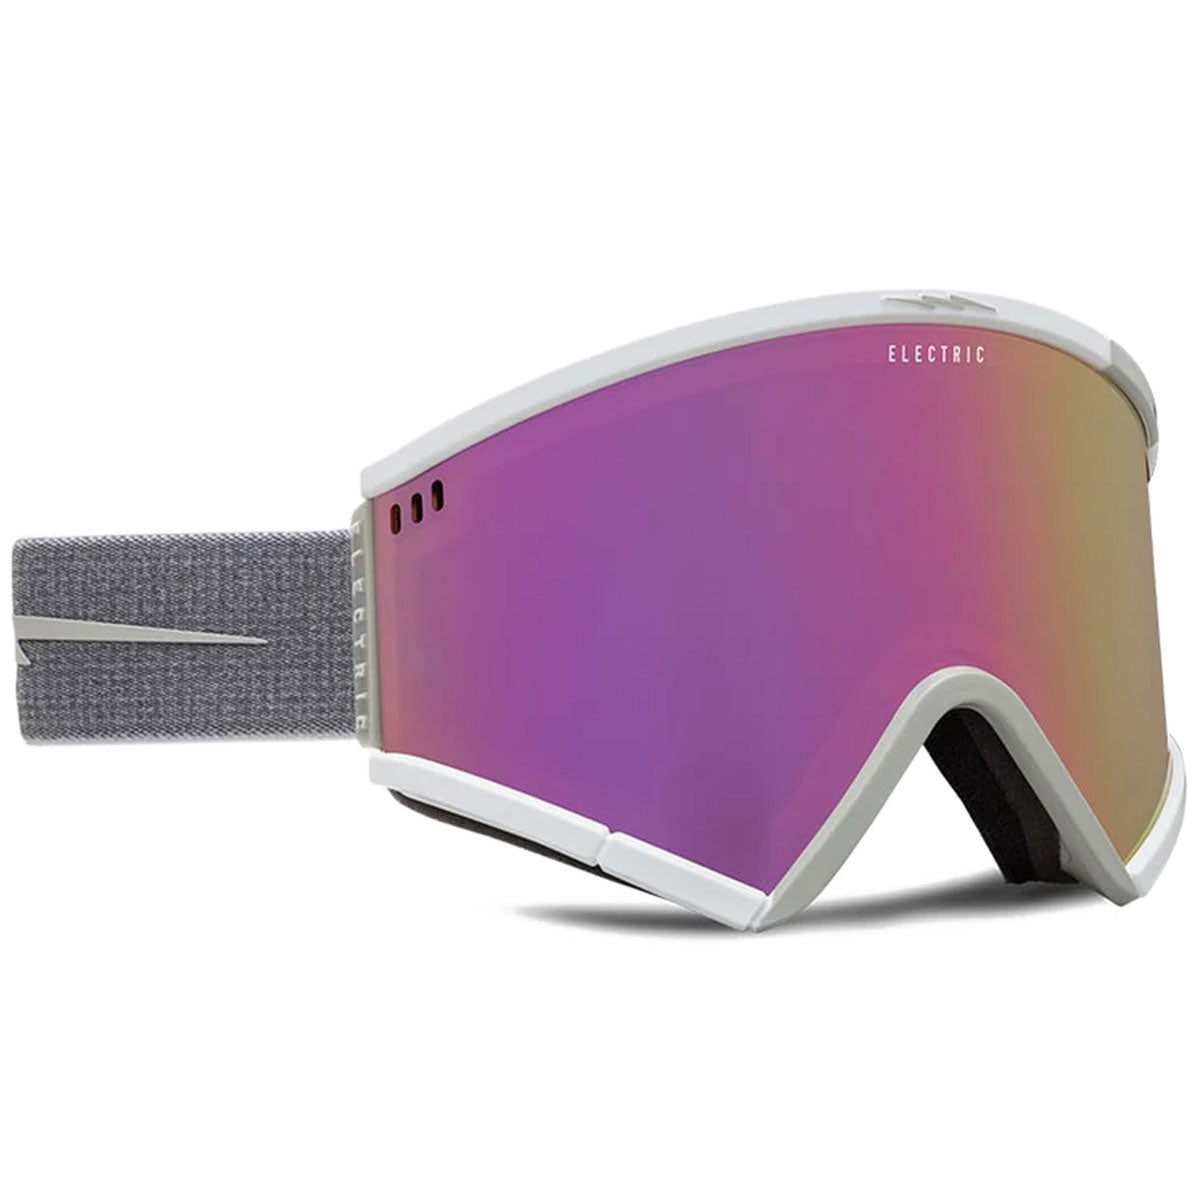 Electric Roteck Snowboard Goggles - Static White/Coyote Pink image 1